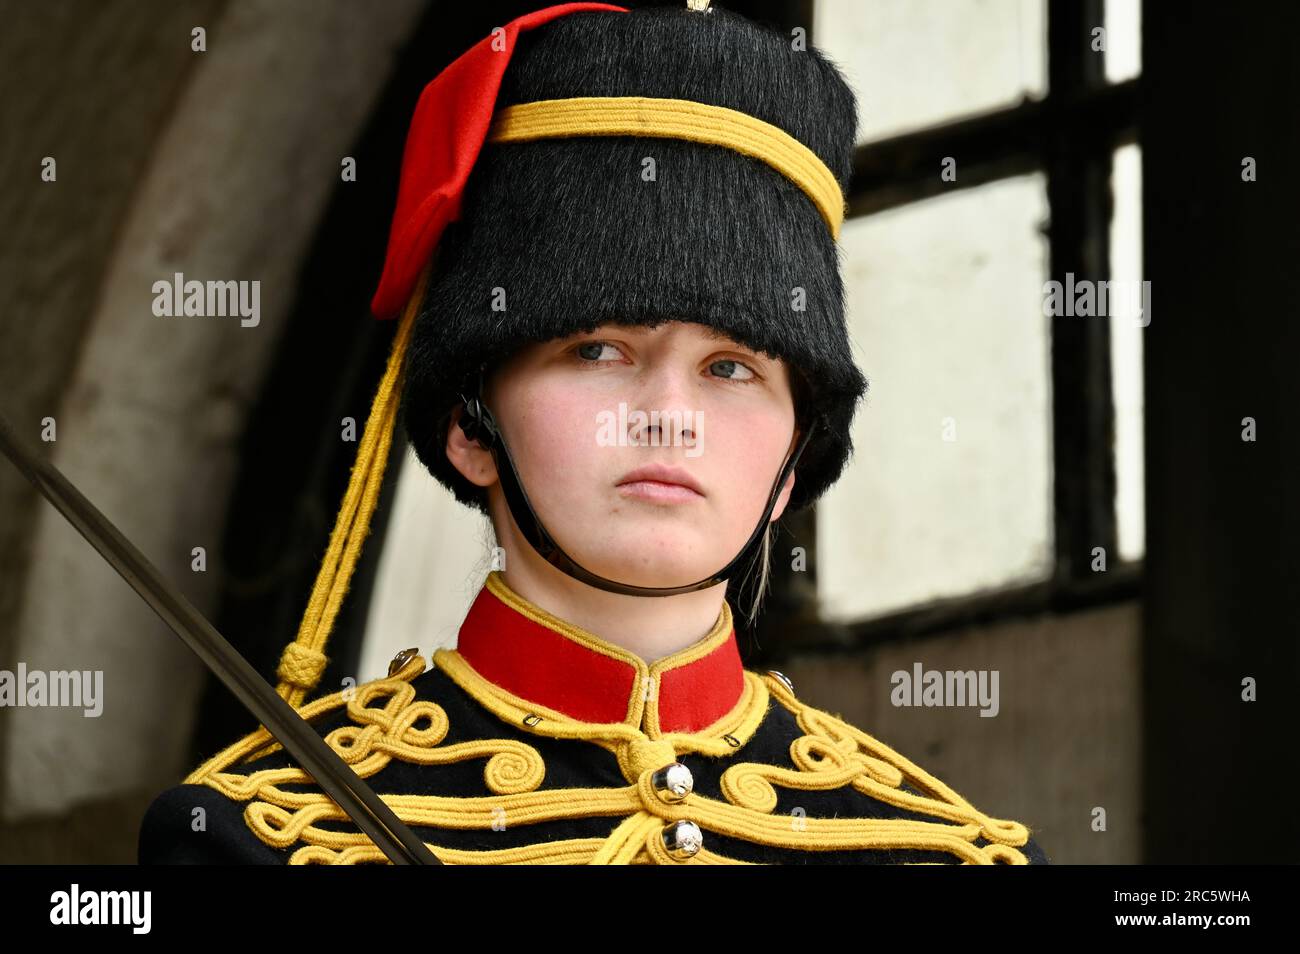 Female Soldier, The King's Troop, Royal Horse Artillery, Horse Guards Parade, Whitehall, London, UK Stock Photo